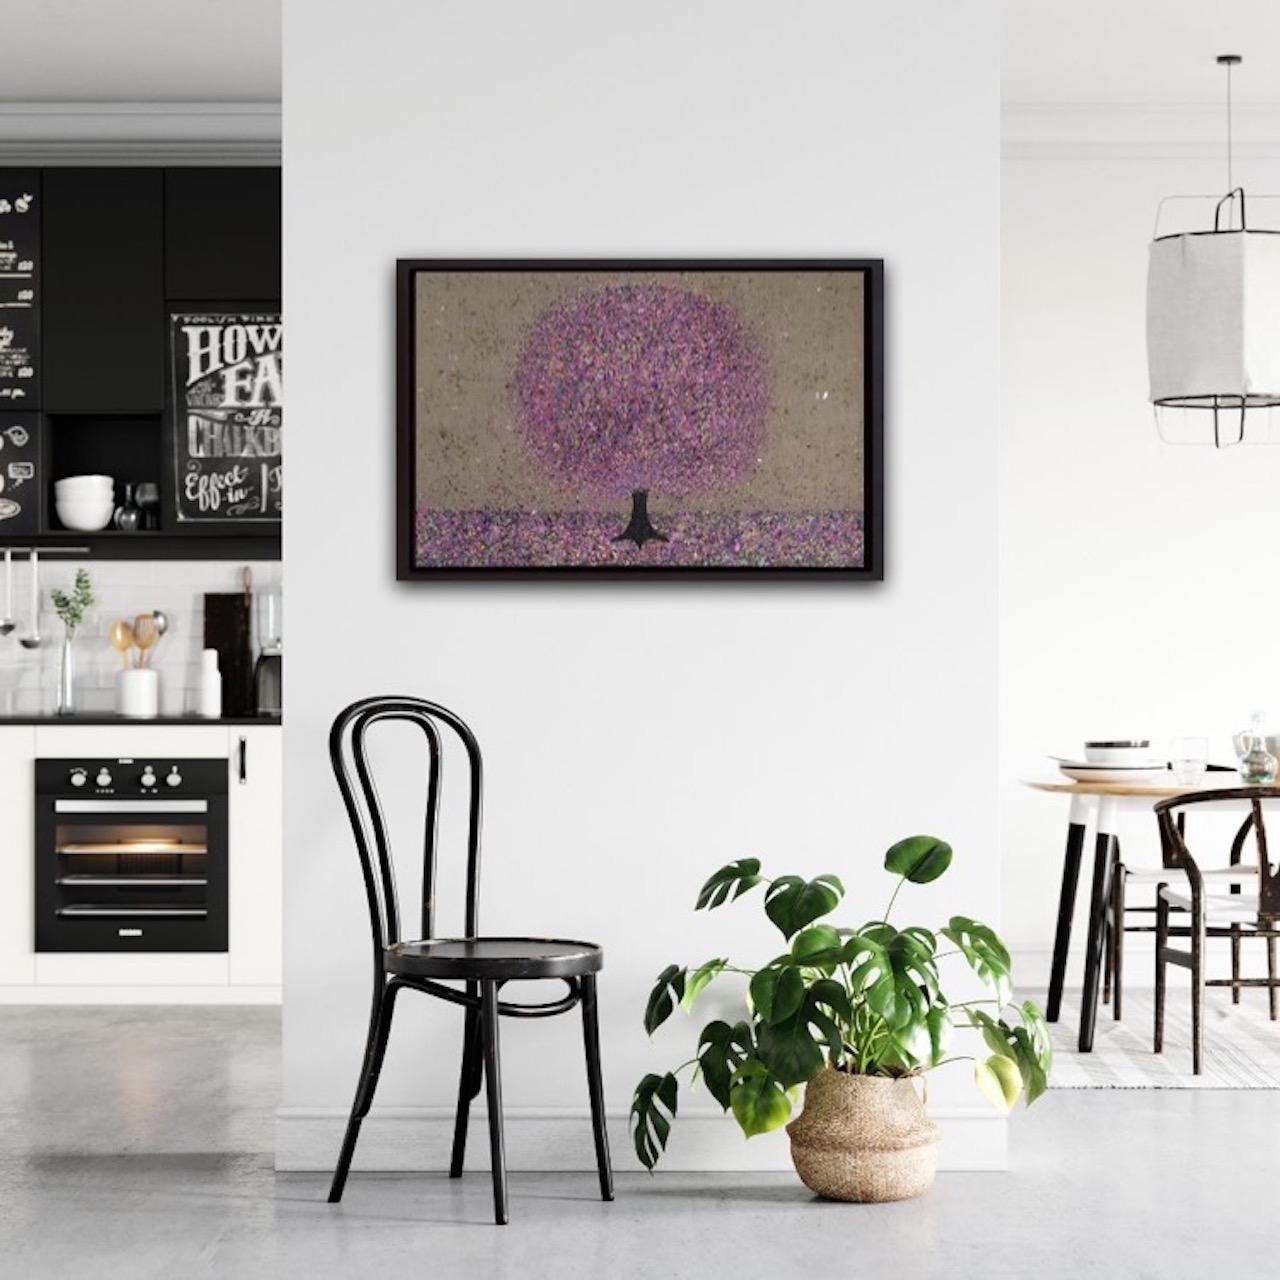 Nicky Chubb
Lilacs on a Summer Breeze
Original Landscape Painting
Acrylic Paint on Canvas
Canvas Size: H 51cm x W 76cm
Framed Size: H 55cm x W 79cm x D 3.5cm
Sold Framed in a Black Float Frame
Please Note that in situ images are purely an indication